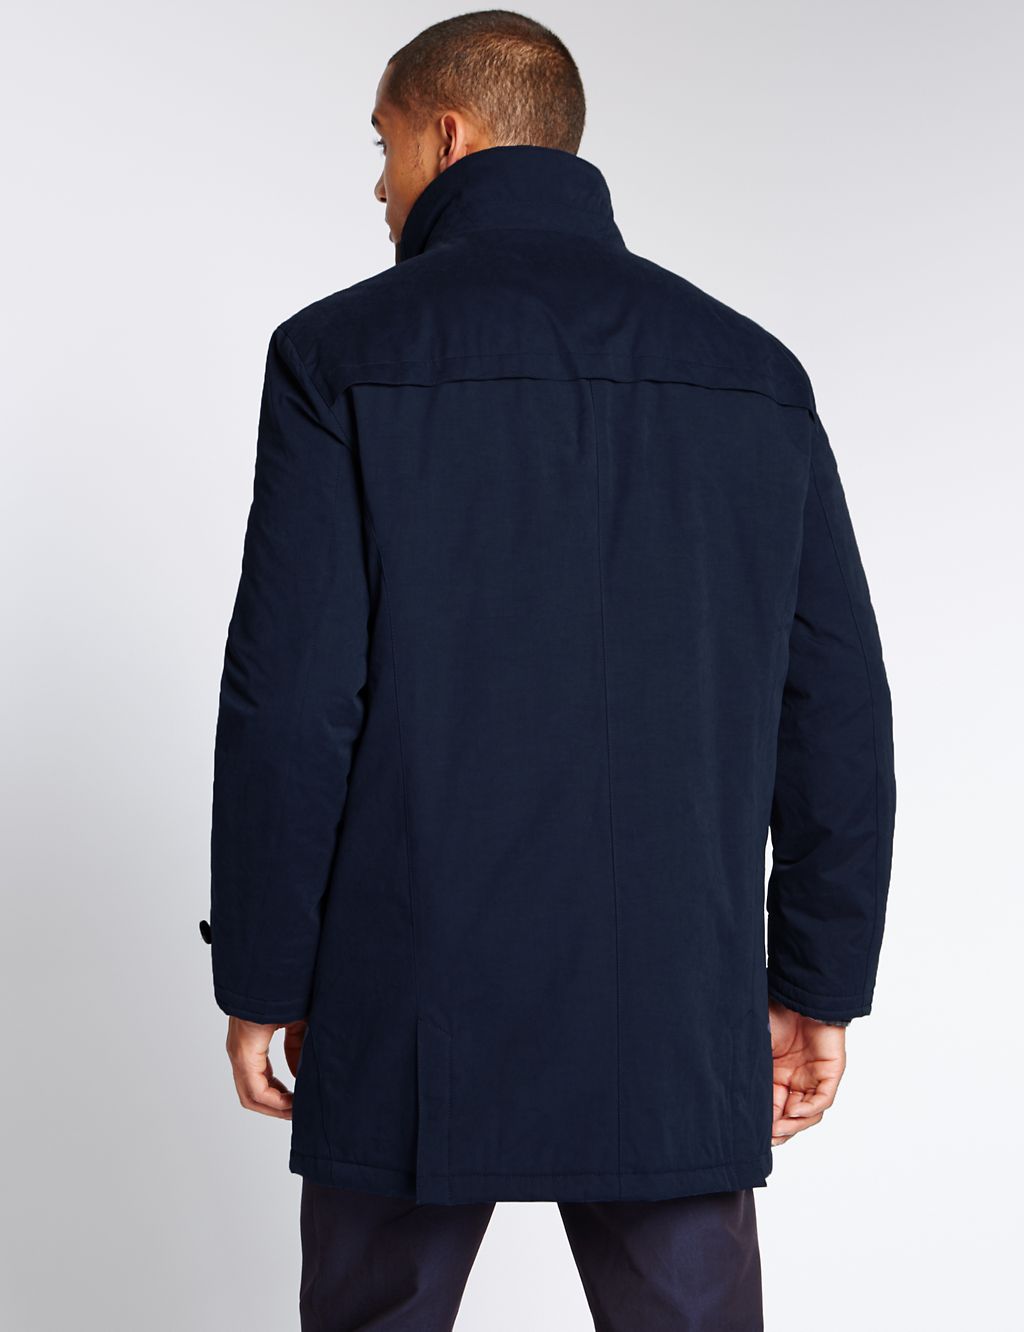 Cotton Blend Jacket with Stormwear™ 2 of 4